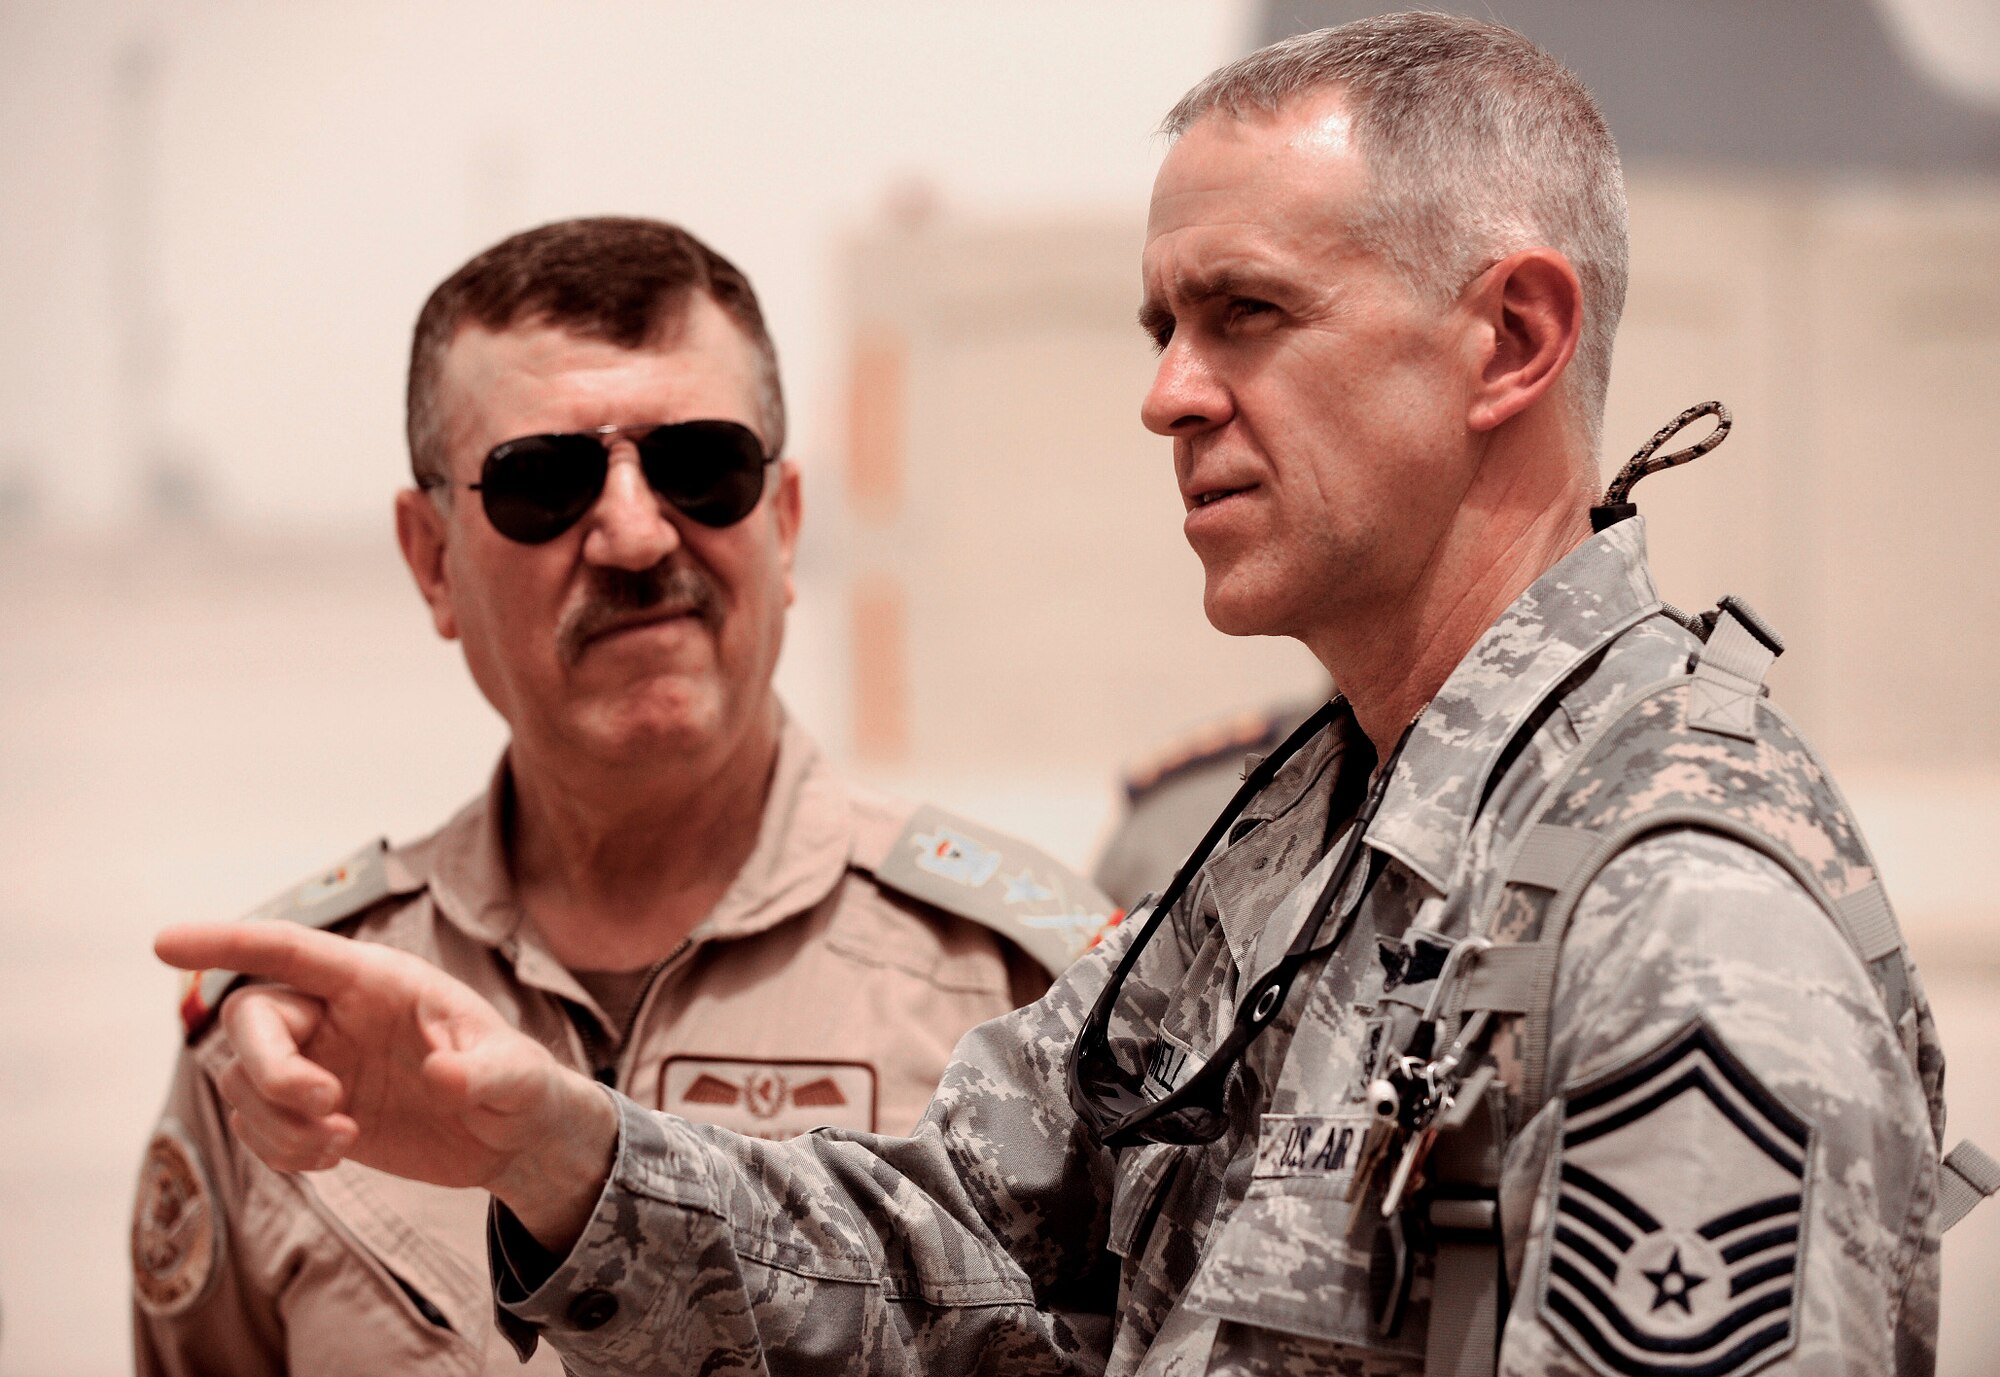 Senior Master Sgt. Marvin Howell speaks with Iraqi air force Chief of Staff Lt. Gen. Anwar Ahmed as Iraqi medics practice litter carrying commands May 19, 2011. Six Iraqi air force medics received two days of joint aeromedical evacuation training with Air Force and Army advisers. Sergeant Howell is the 332nd Expeditionary Medical Operations Squadron superintendent. (U.S. Air Force/Tech. Sgt. Jason Lake)